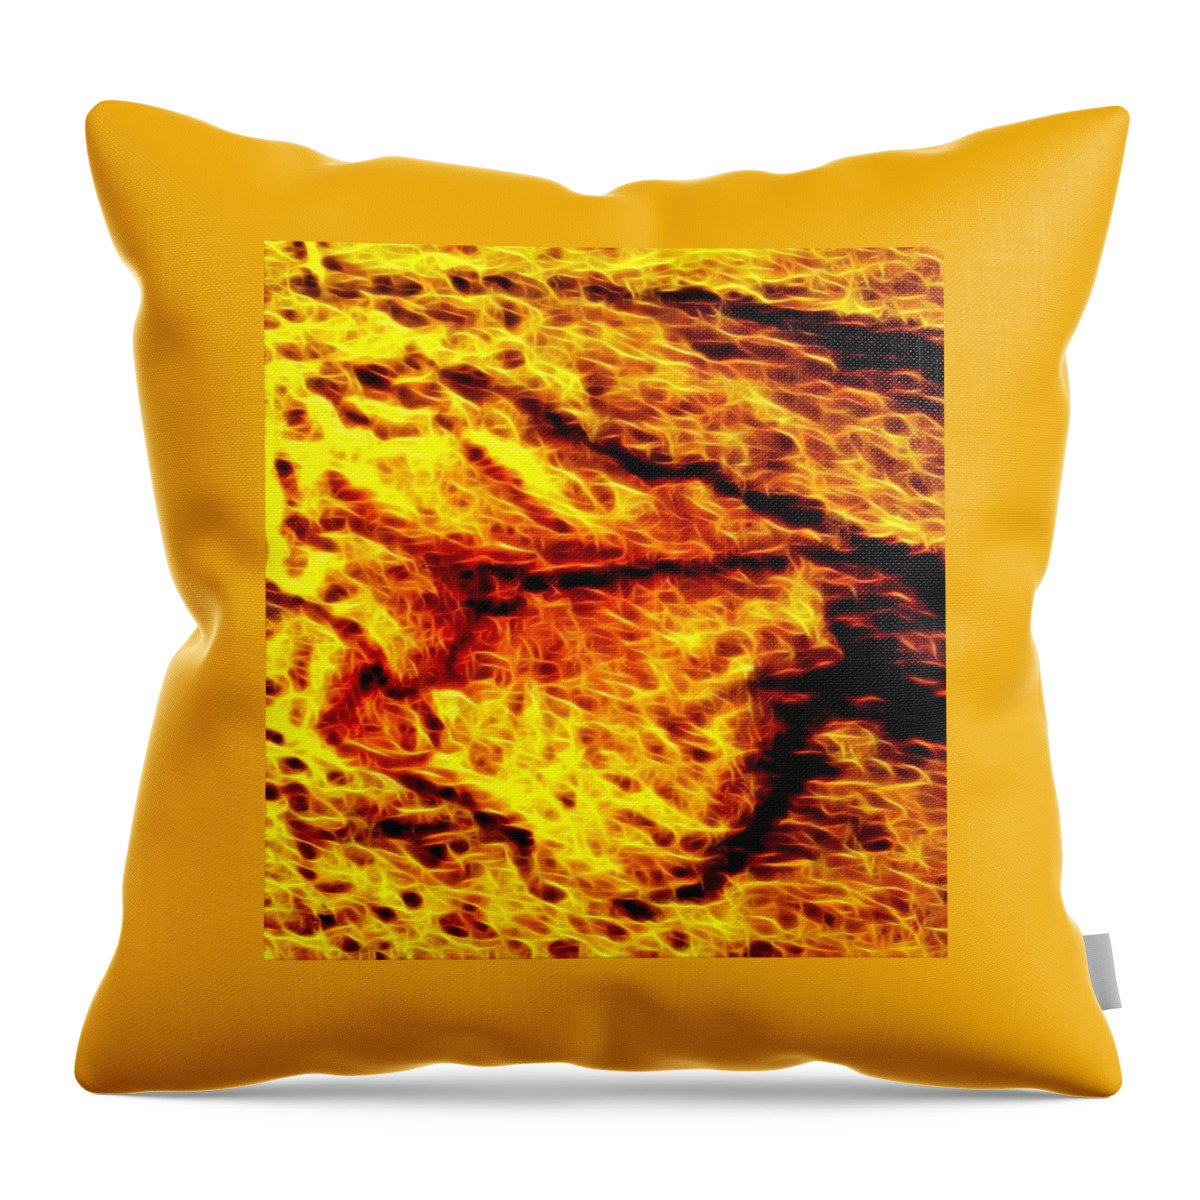 Eagle Throw Pillow featuring the digital art The Eagle is Angry by Gina Callaghan